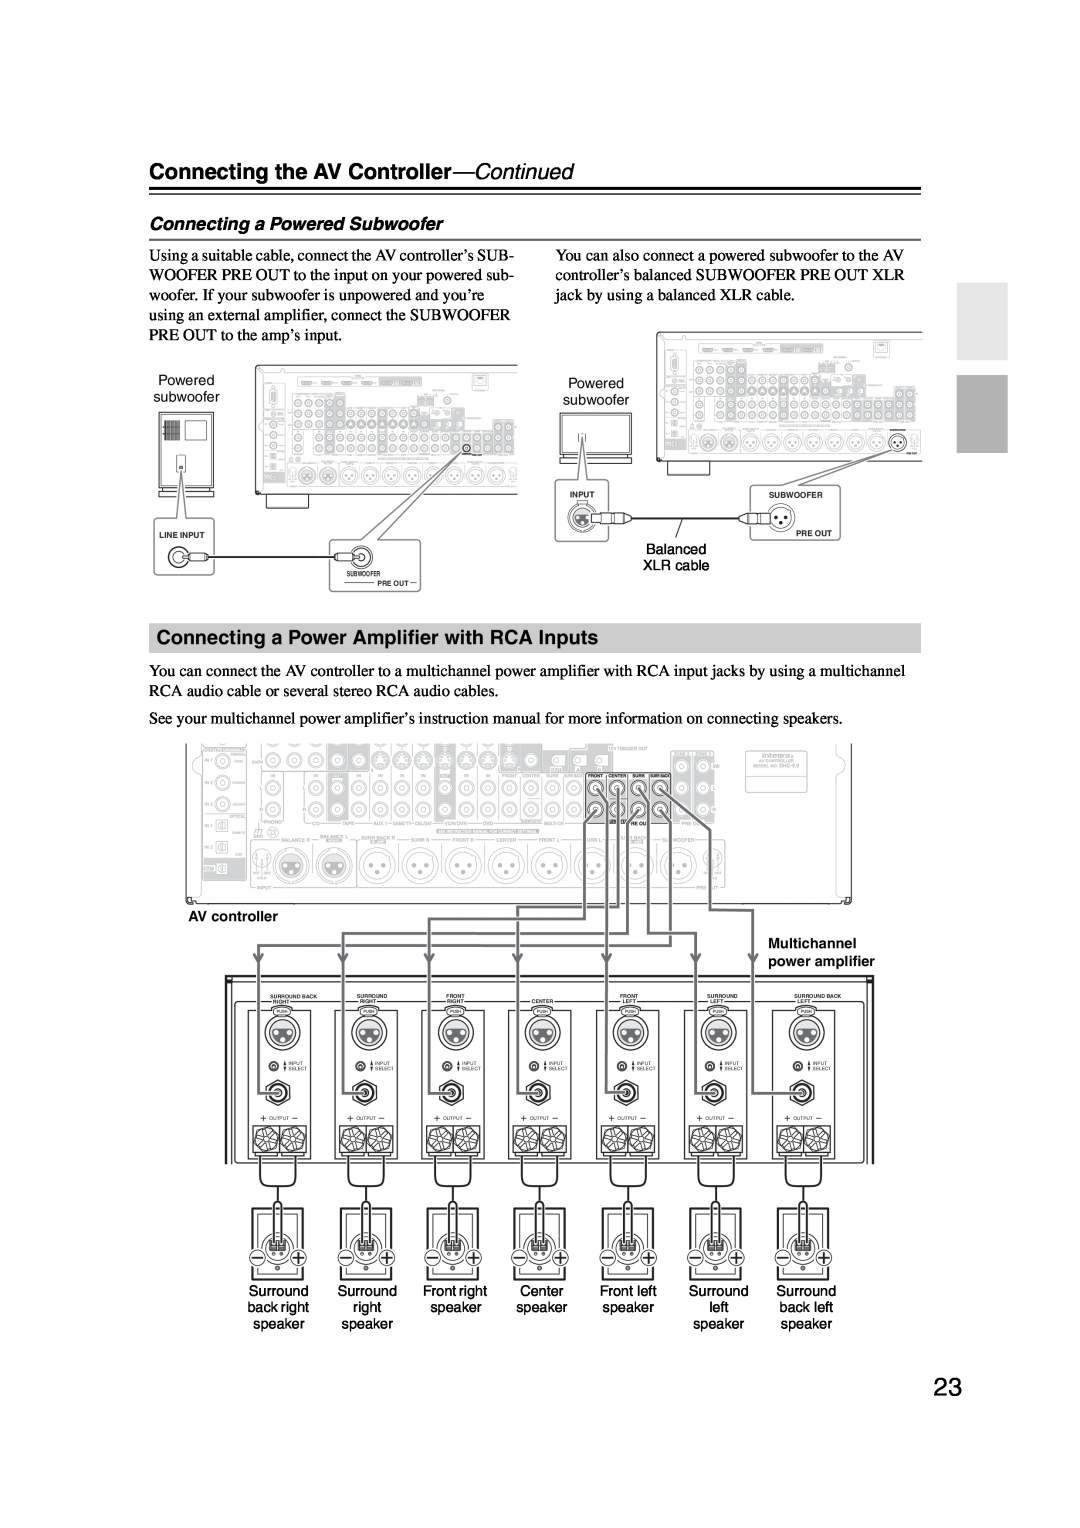 Integra DHC-9.9 instruction manual Connecting the AV Controller—Continued, Connecting a Power Amplifier with RCA Inputs 